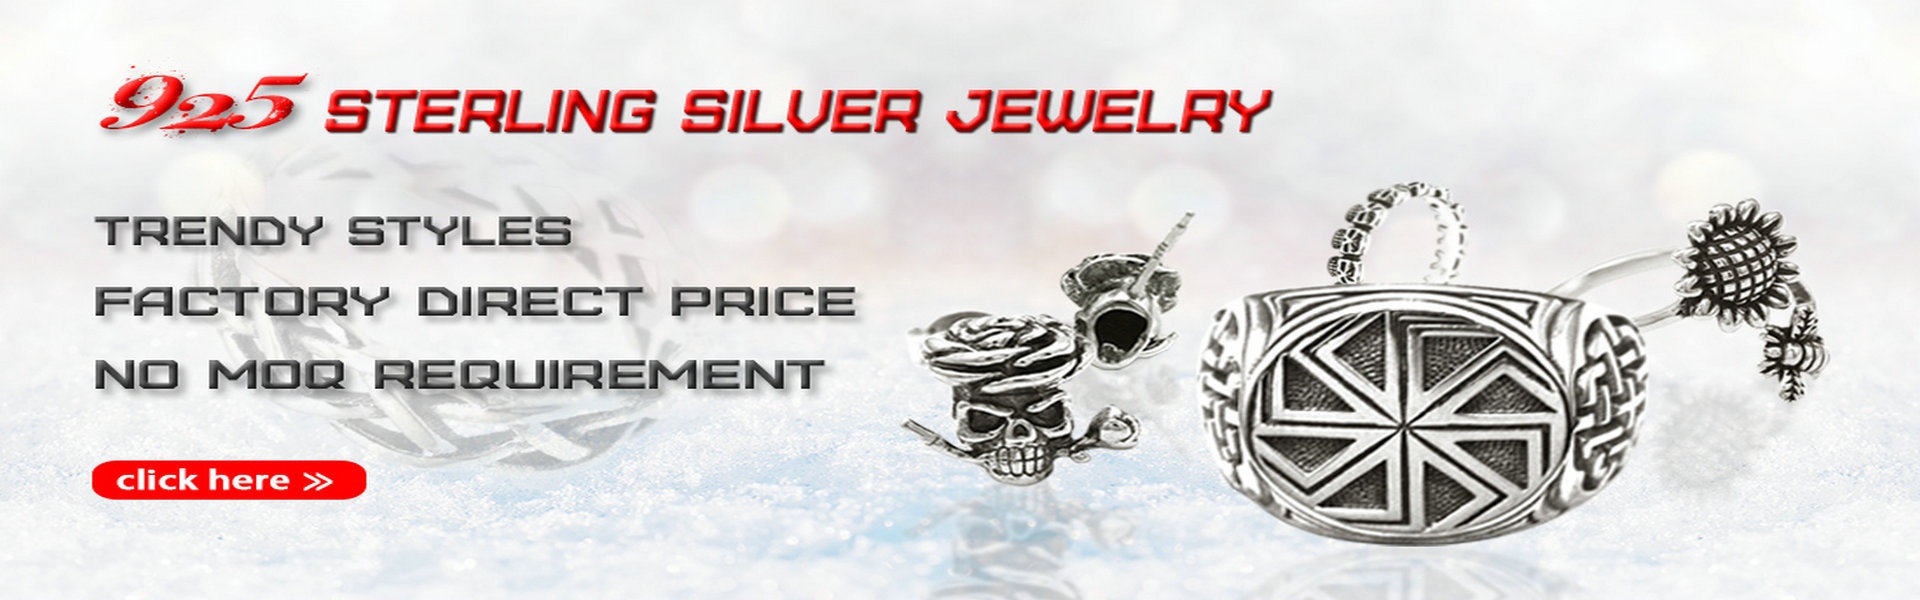 Looking for 925 sterling silver jewelry manufacturer